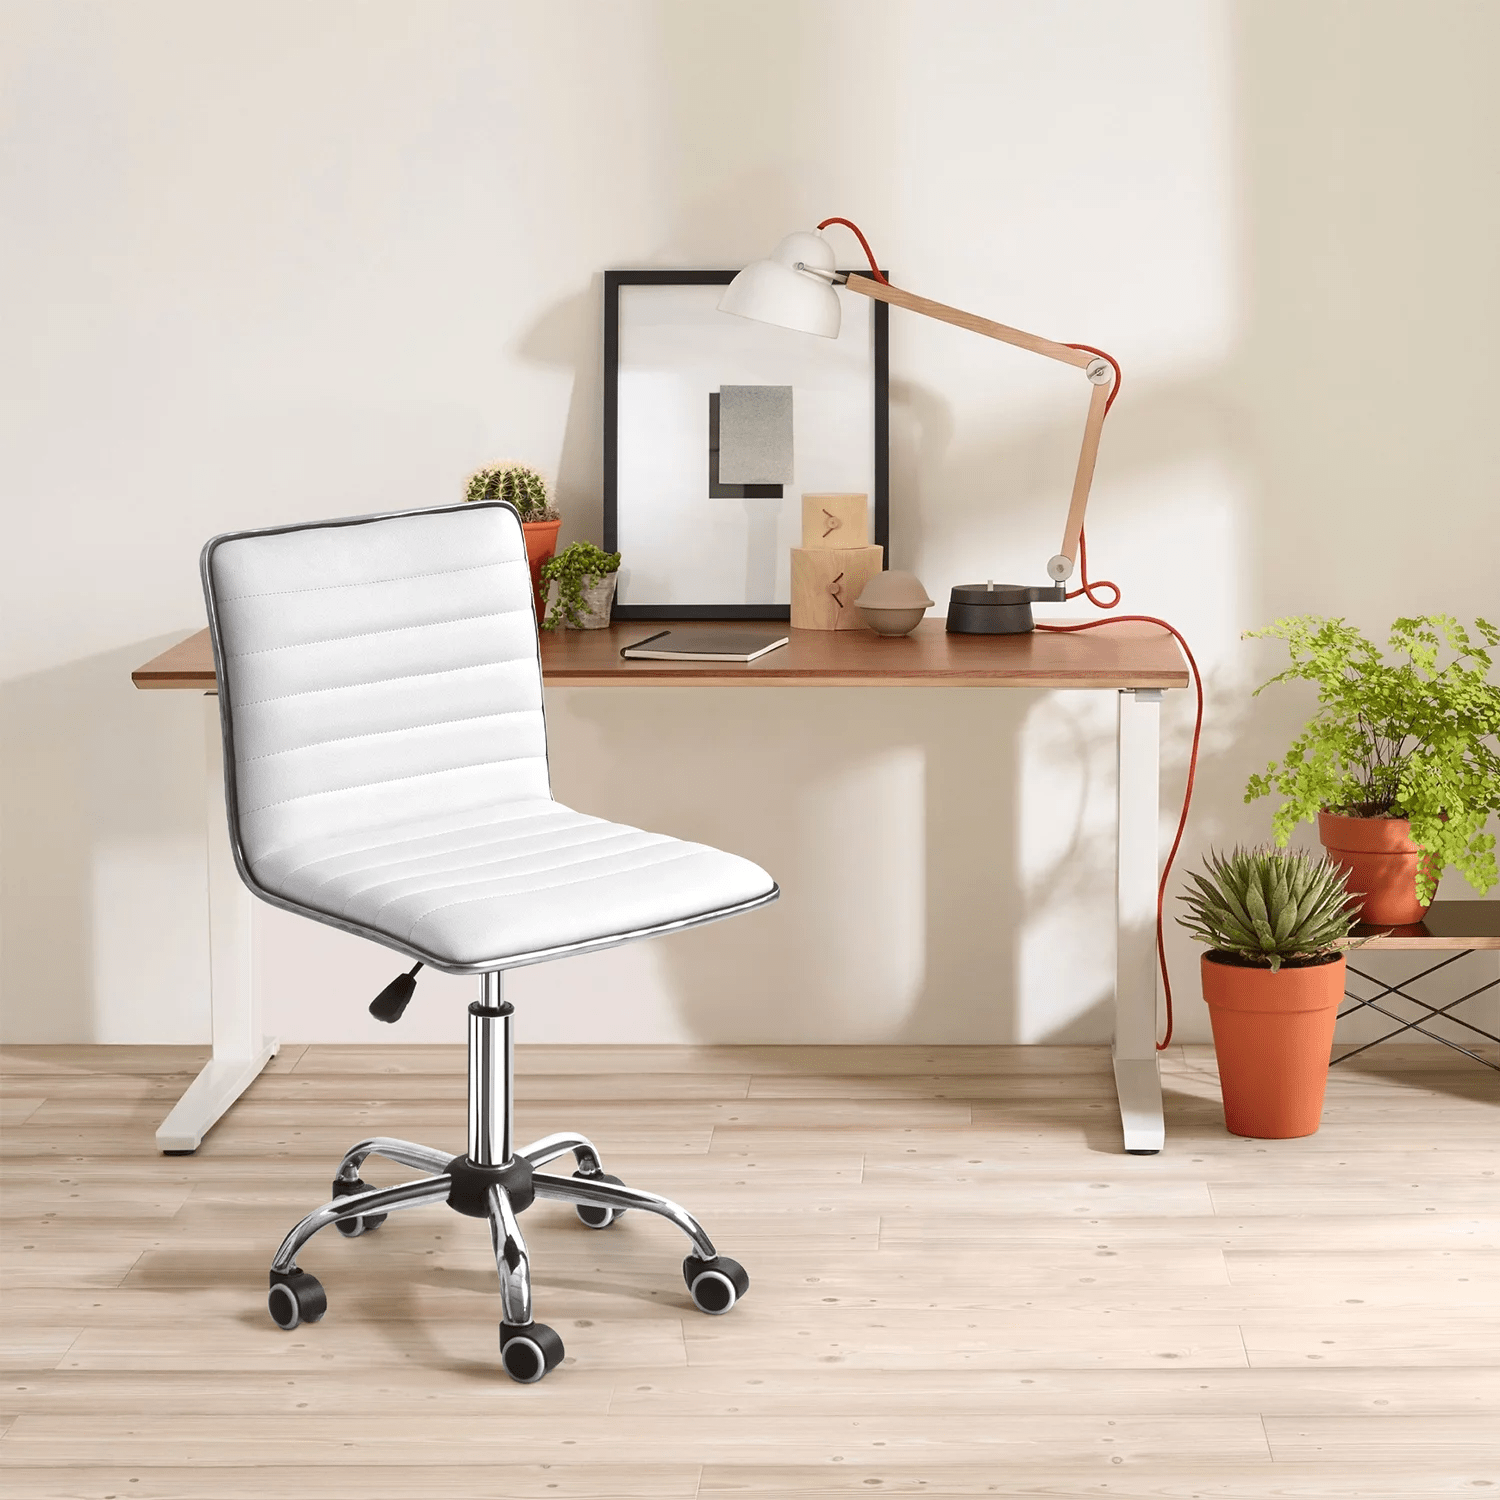 

Office Desk Chair, Adjustable Task Chair, Low Back Faux Leather Ribbed Swivel Chair, Armless Home Computer Chair Retro With Wheels, Vanity Chair